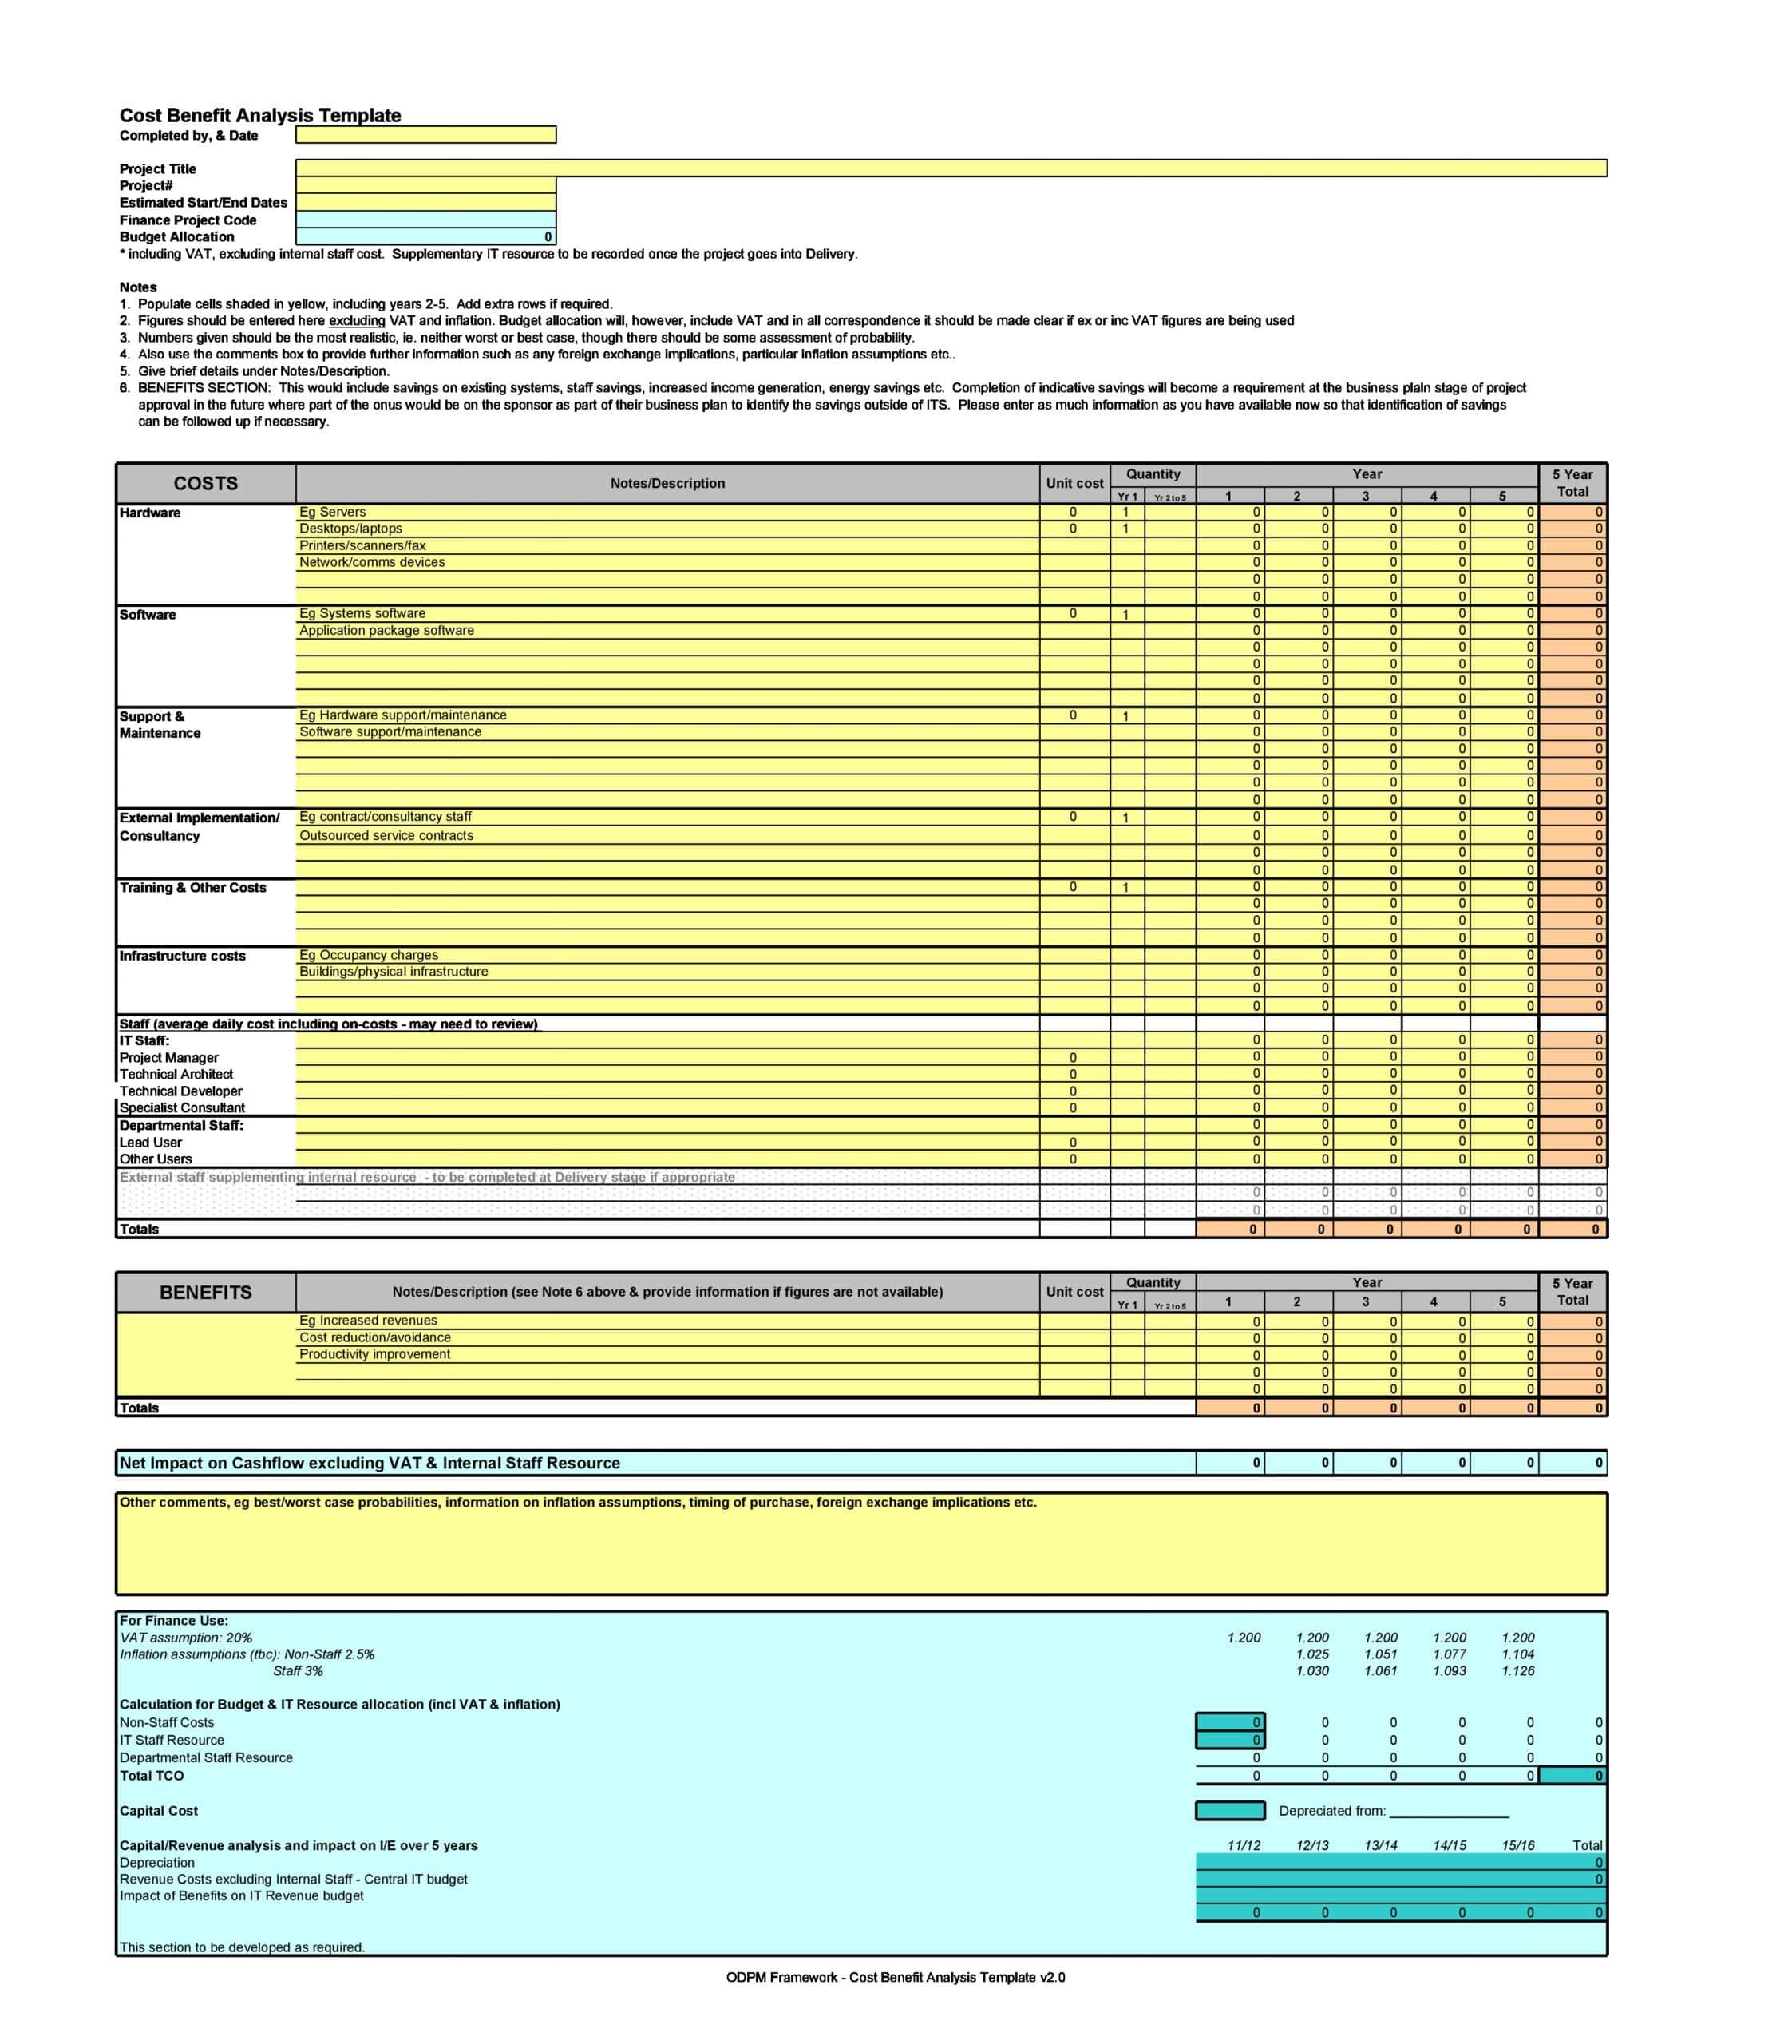 28 Simple Cost Benefit Analysis Templates (Word/Excel) Regarding Cost Benefit Analysis Spreadsheet Template